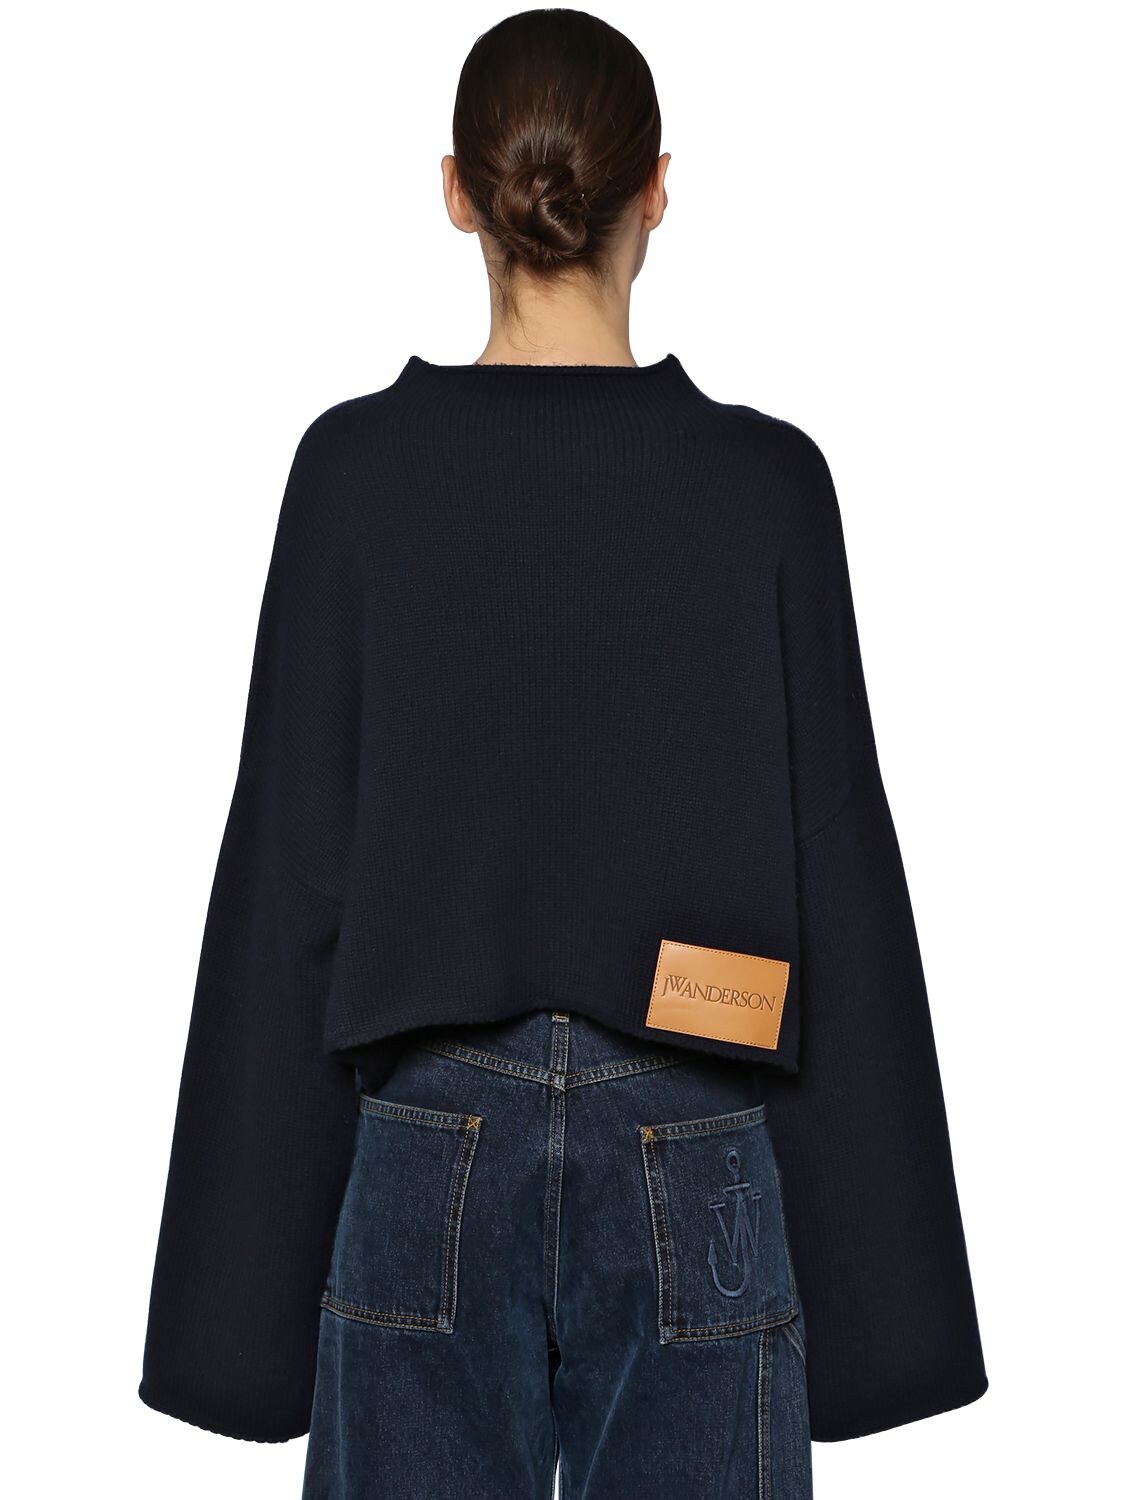 JW ANDERSON OVERSIZE WOOL & CASHMERE KNIT SWEATER,68IWG8006-ODg40